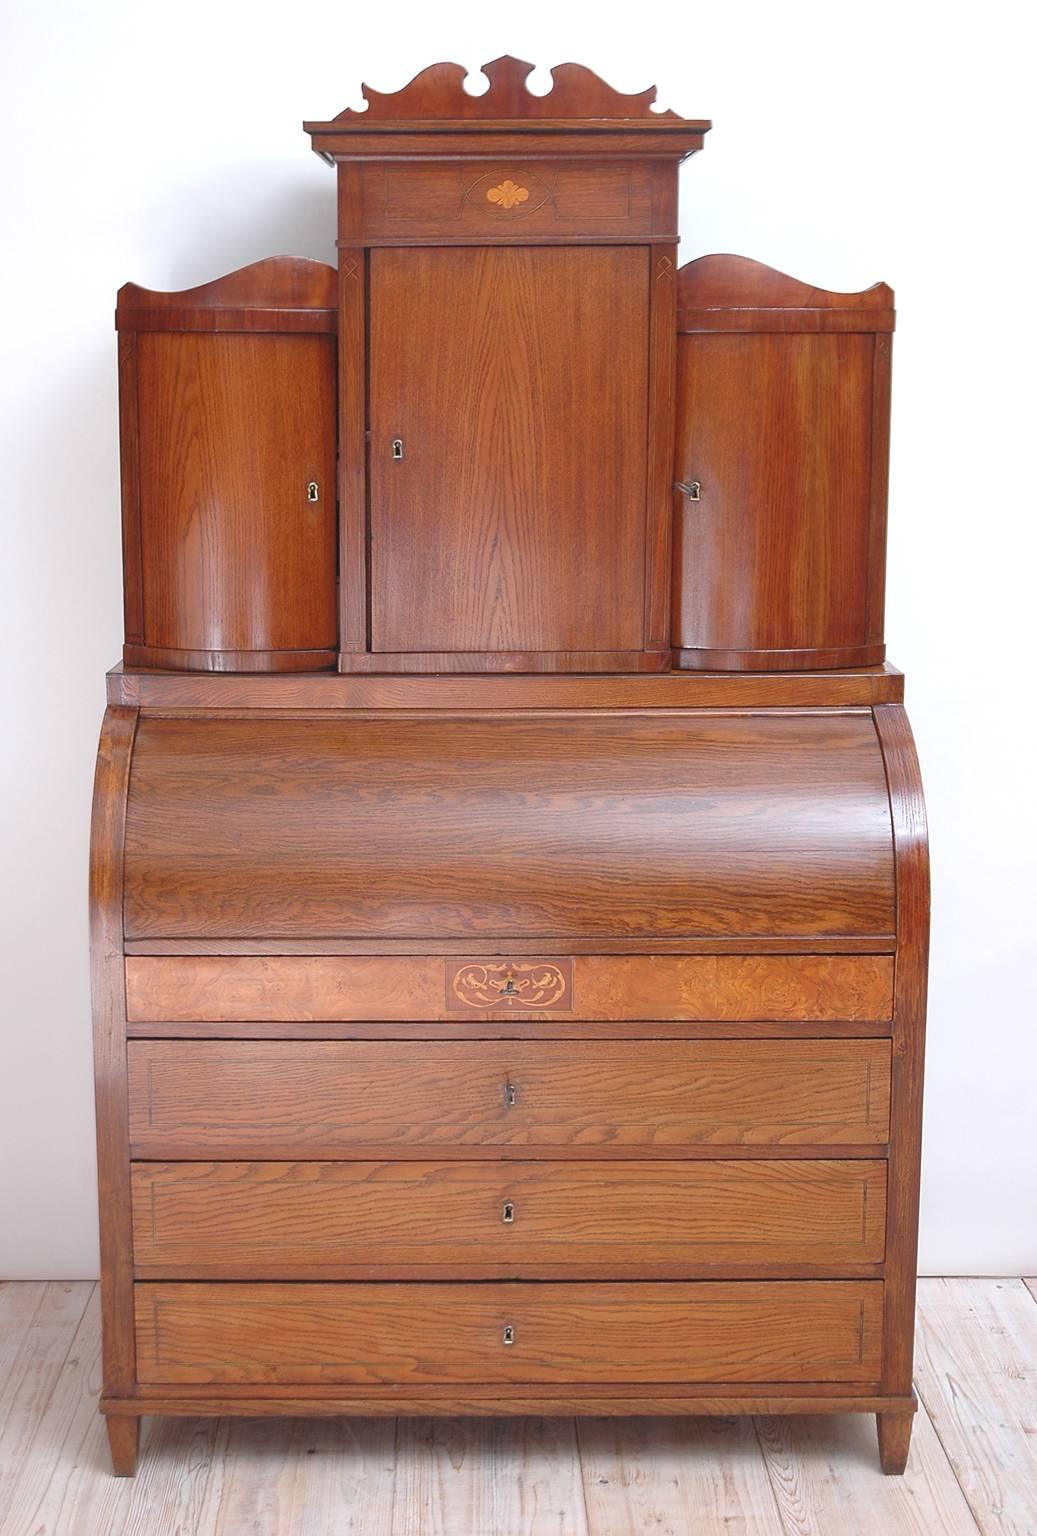 From the Hamburg/Schleswig-Holstein region of Germany, once part of Denmark, a handsome Empire secretary in ash with tiered bureau bookcase with bowed doors. Interior writing desk is in birch and kingwood and consists of ten small drawers and one